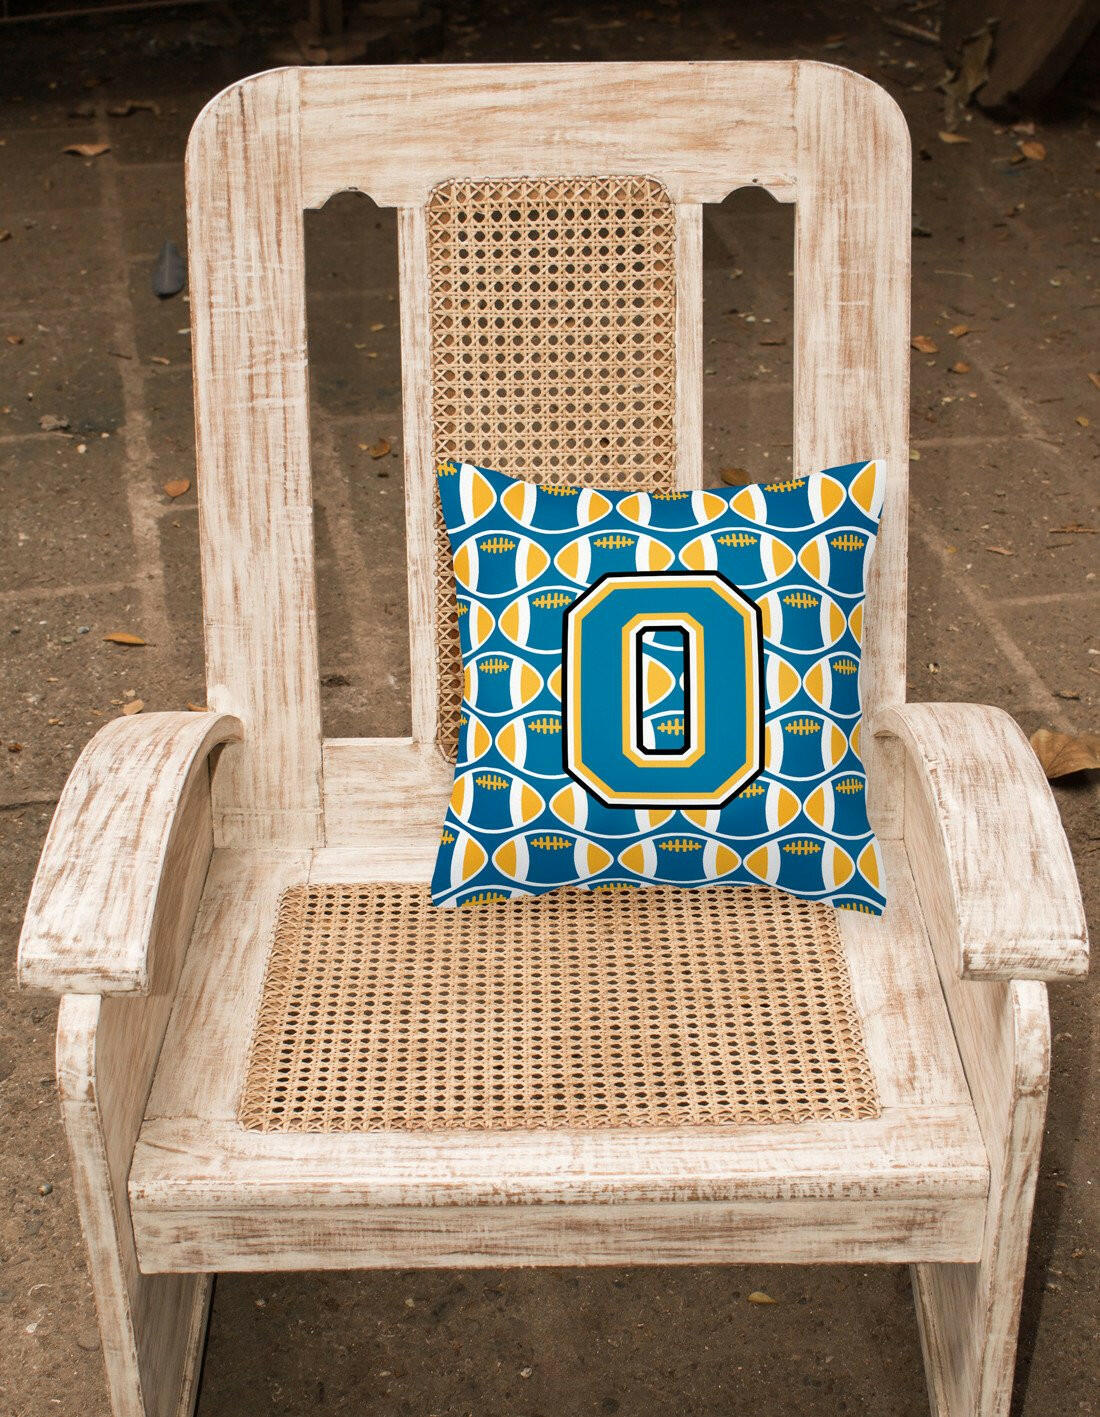 Letter O Football Blue and Gold Fabric Decorative Pillow CJ1077-OPW1414 by Caroline's Treasures